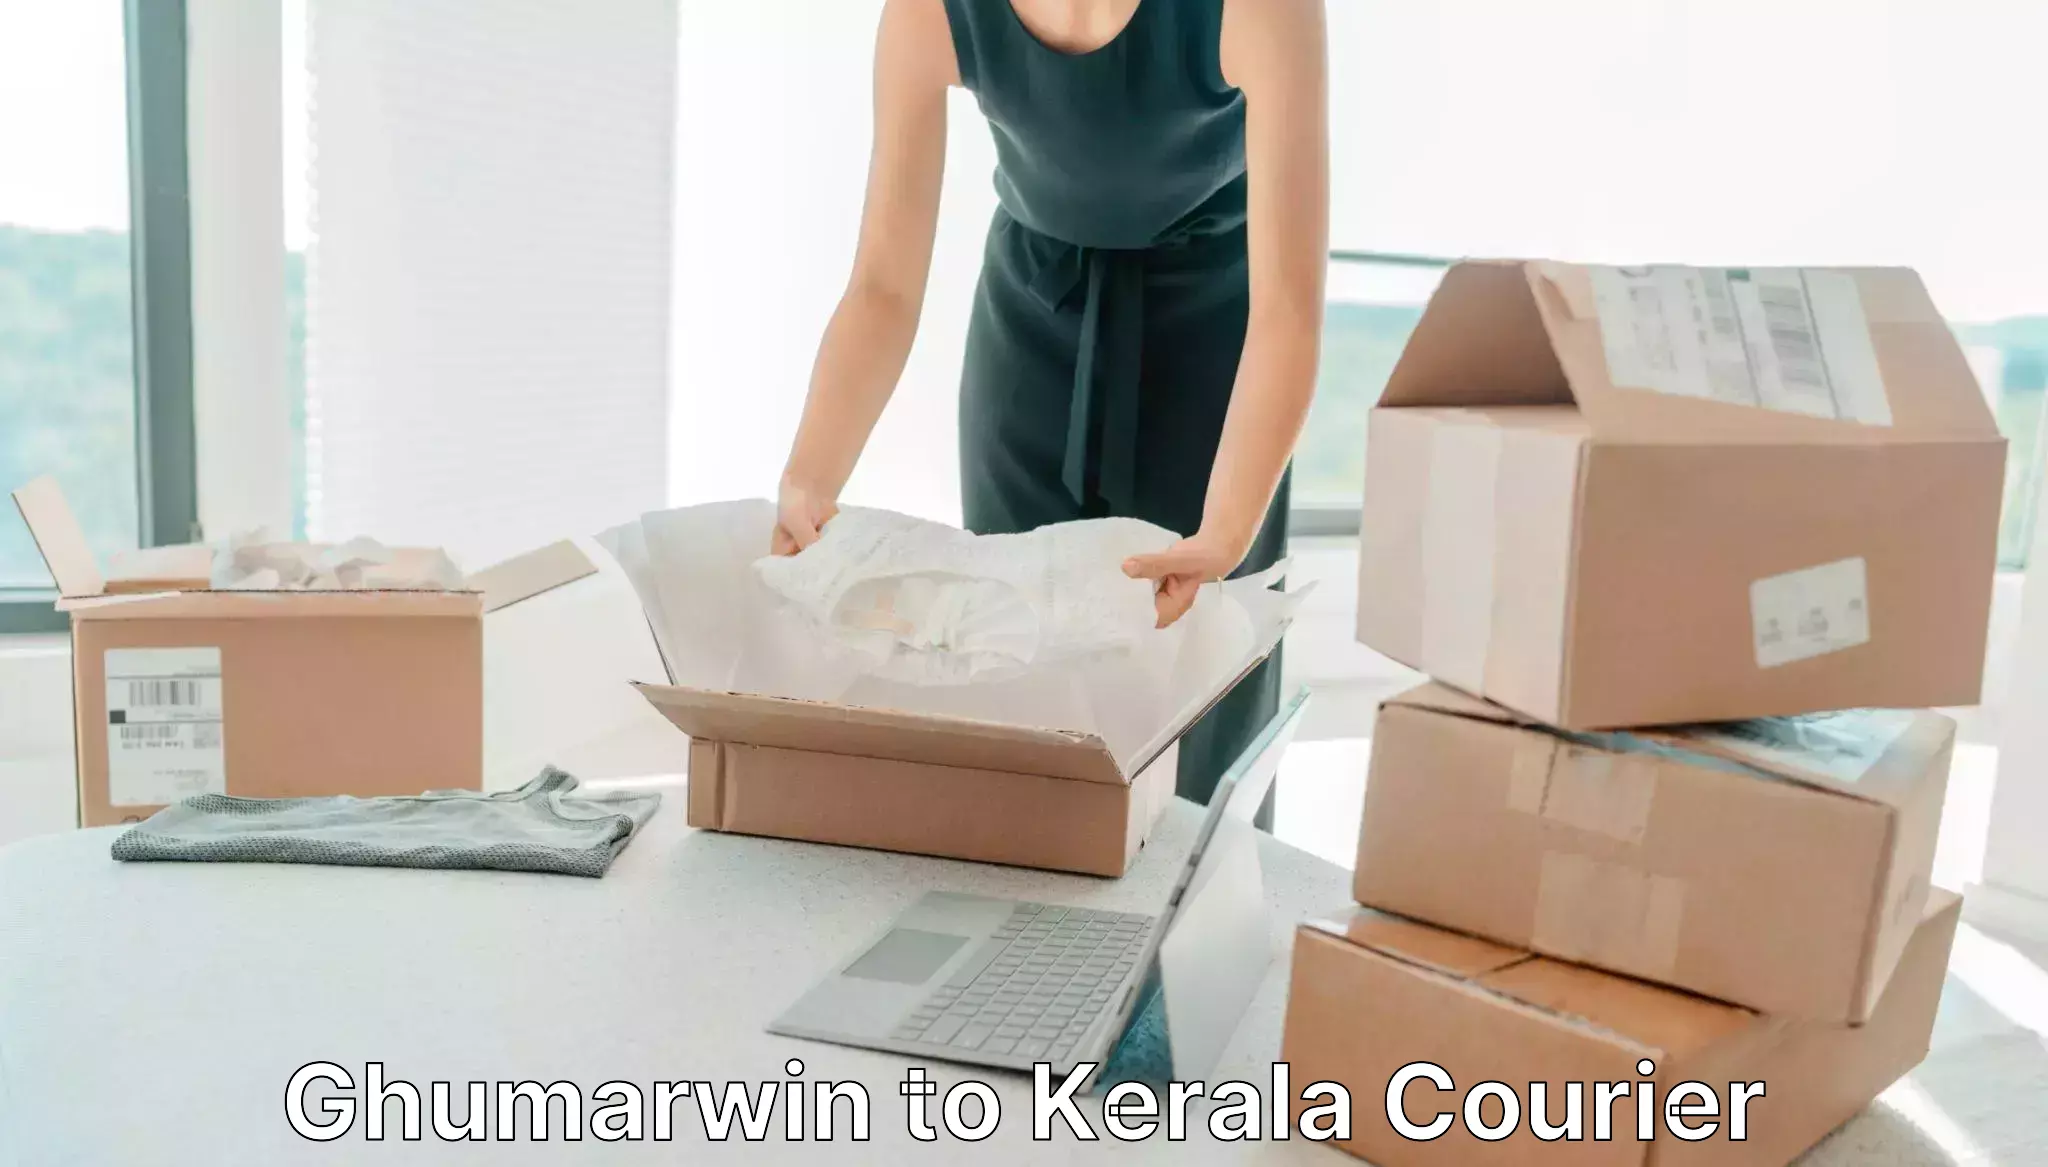 Cargo delivery service Ghumarwin to Kerala